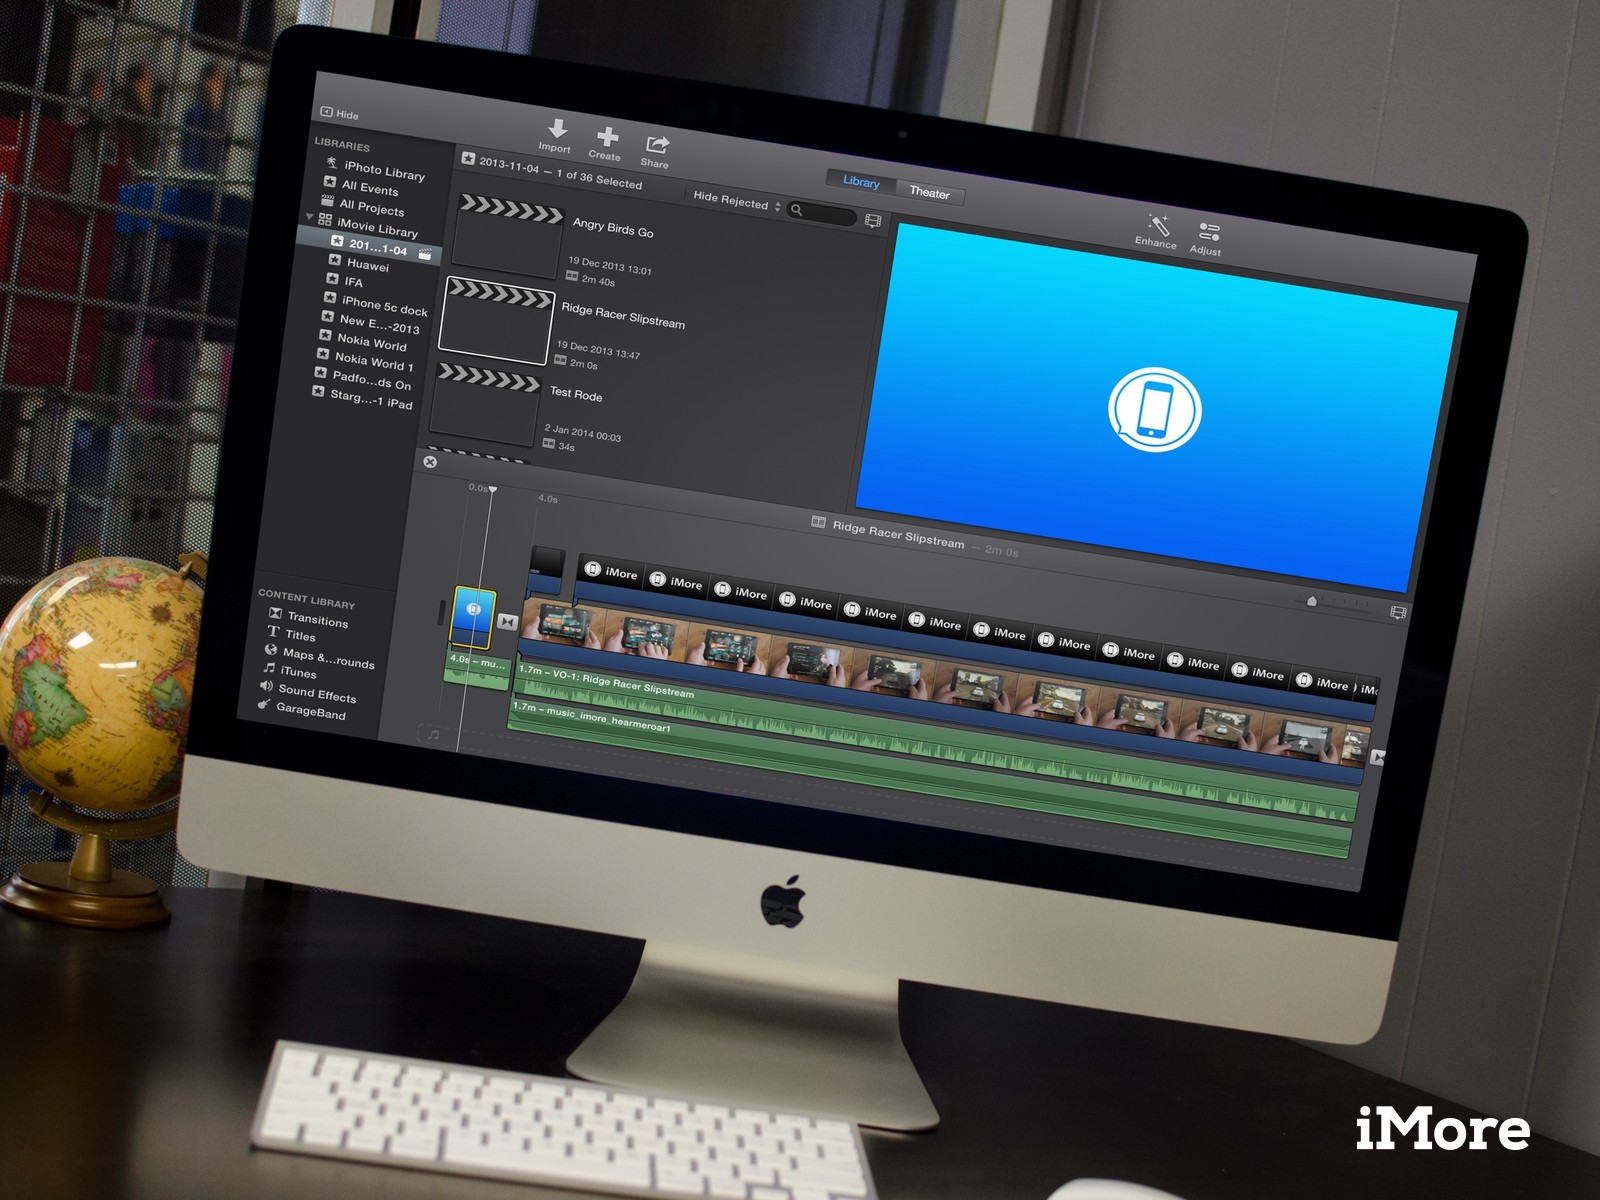 Imovie free download for mac os sierra